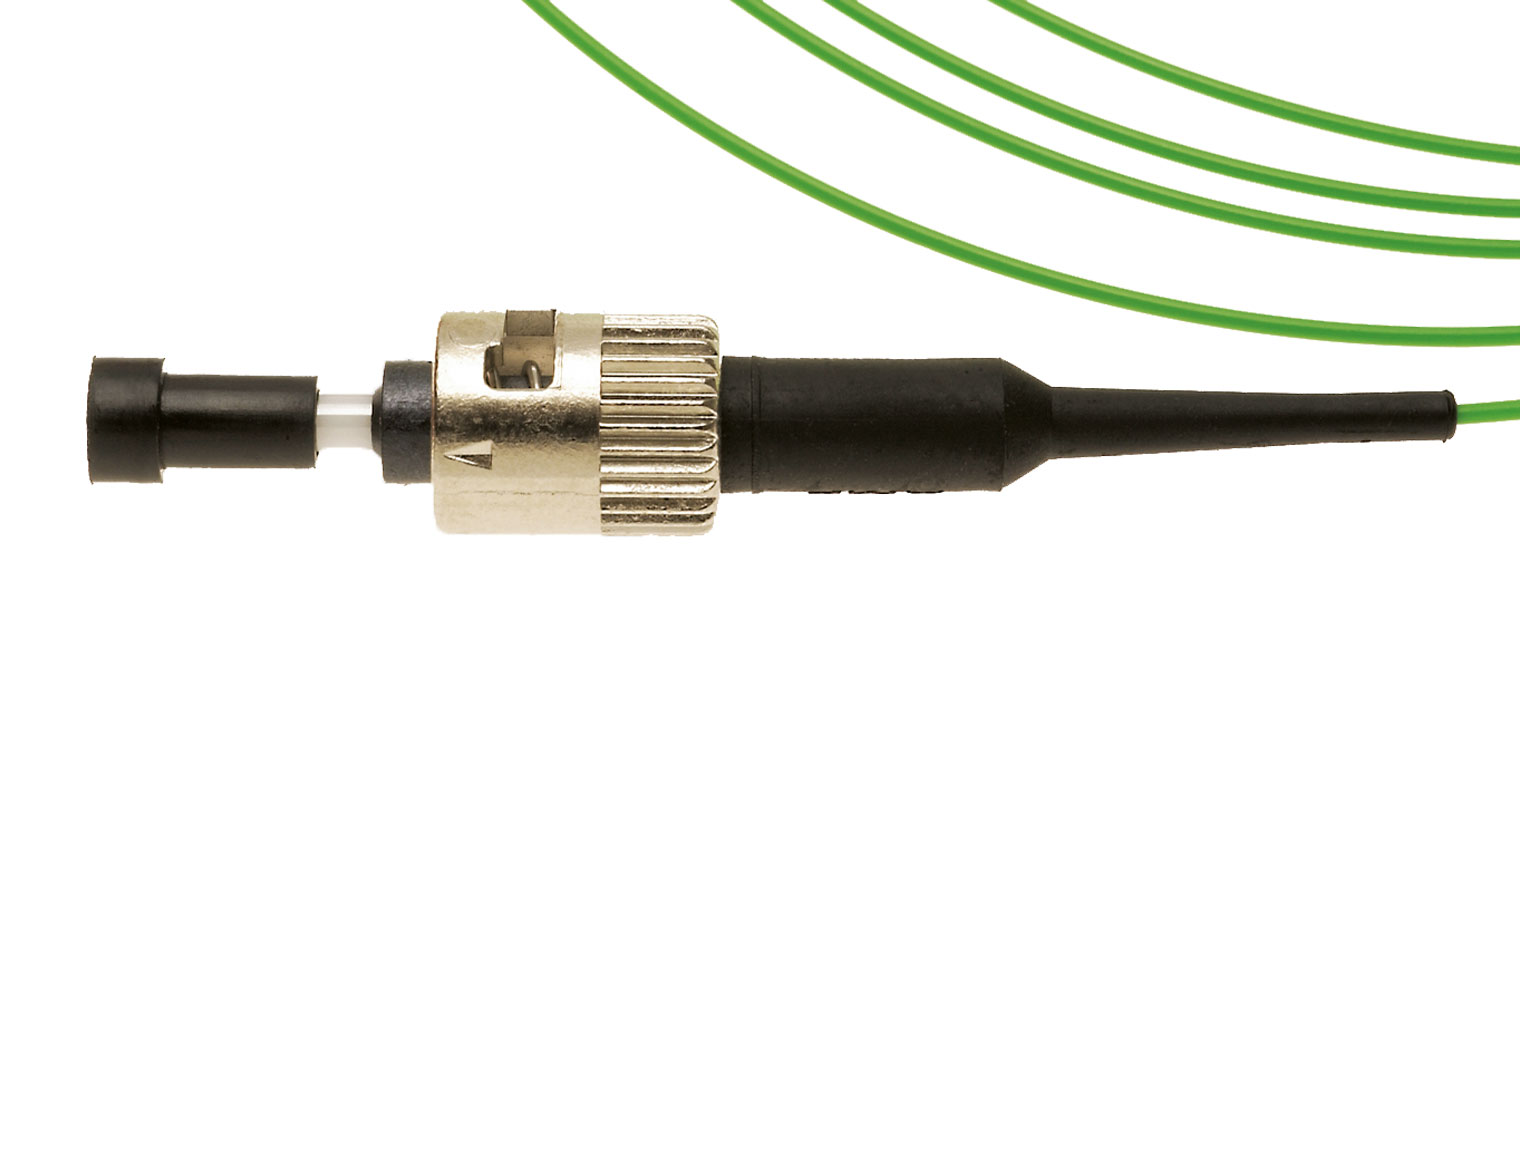 HELUCOM® CONNECTING SYSTEMS® ST-Fibre pigtails 2M